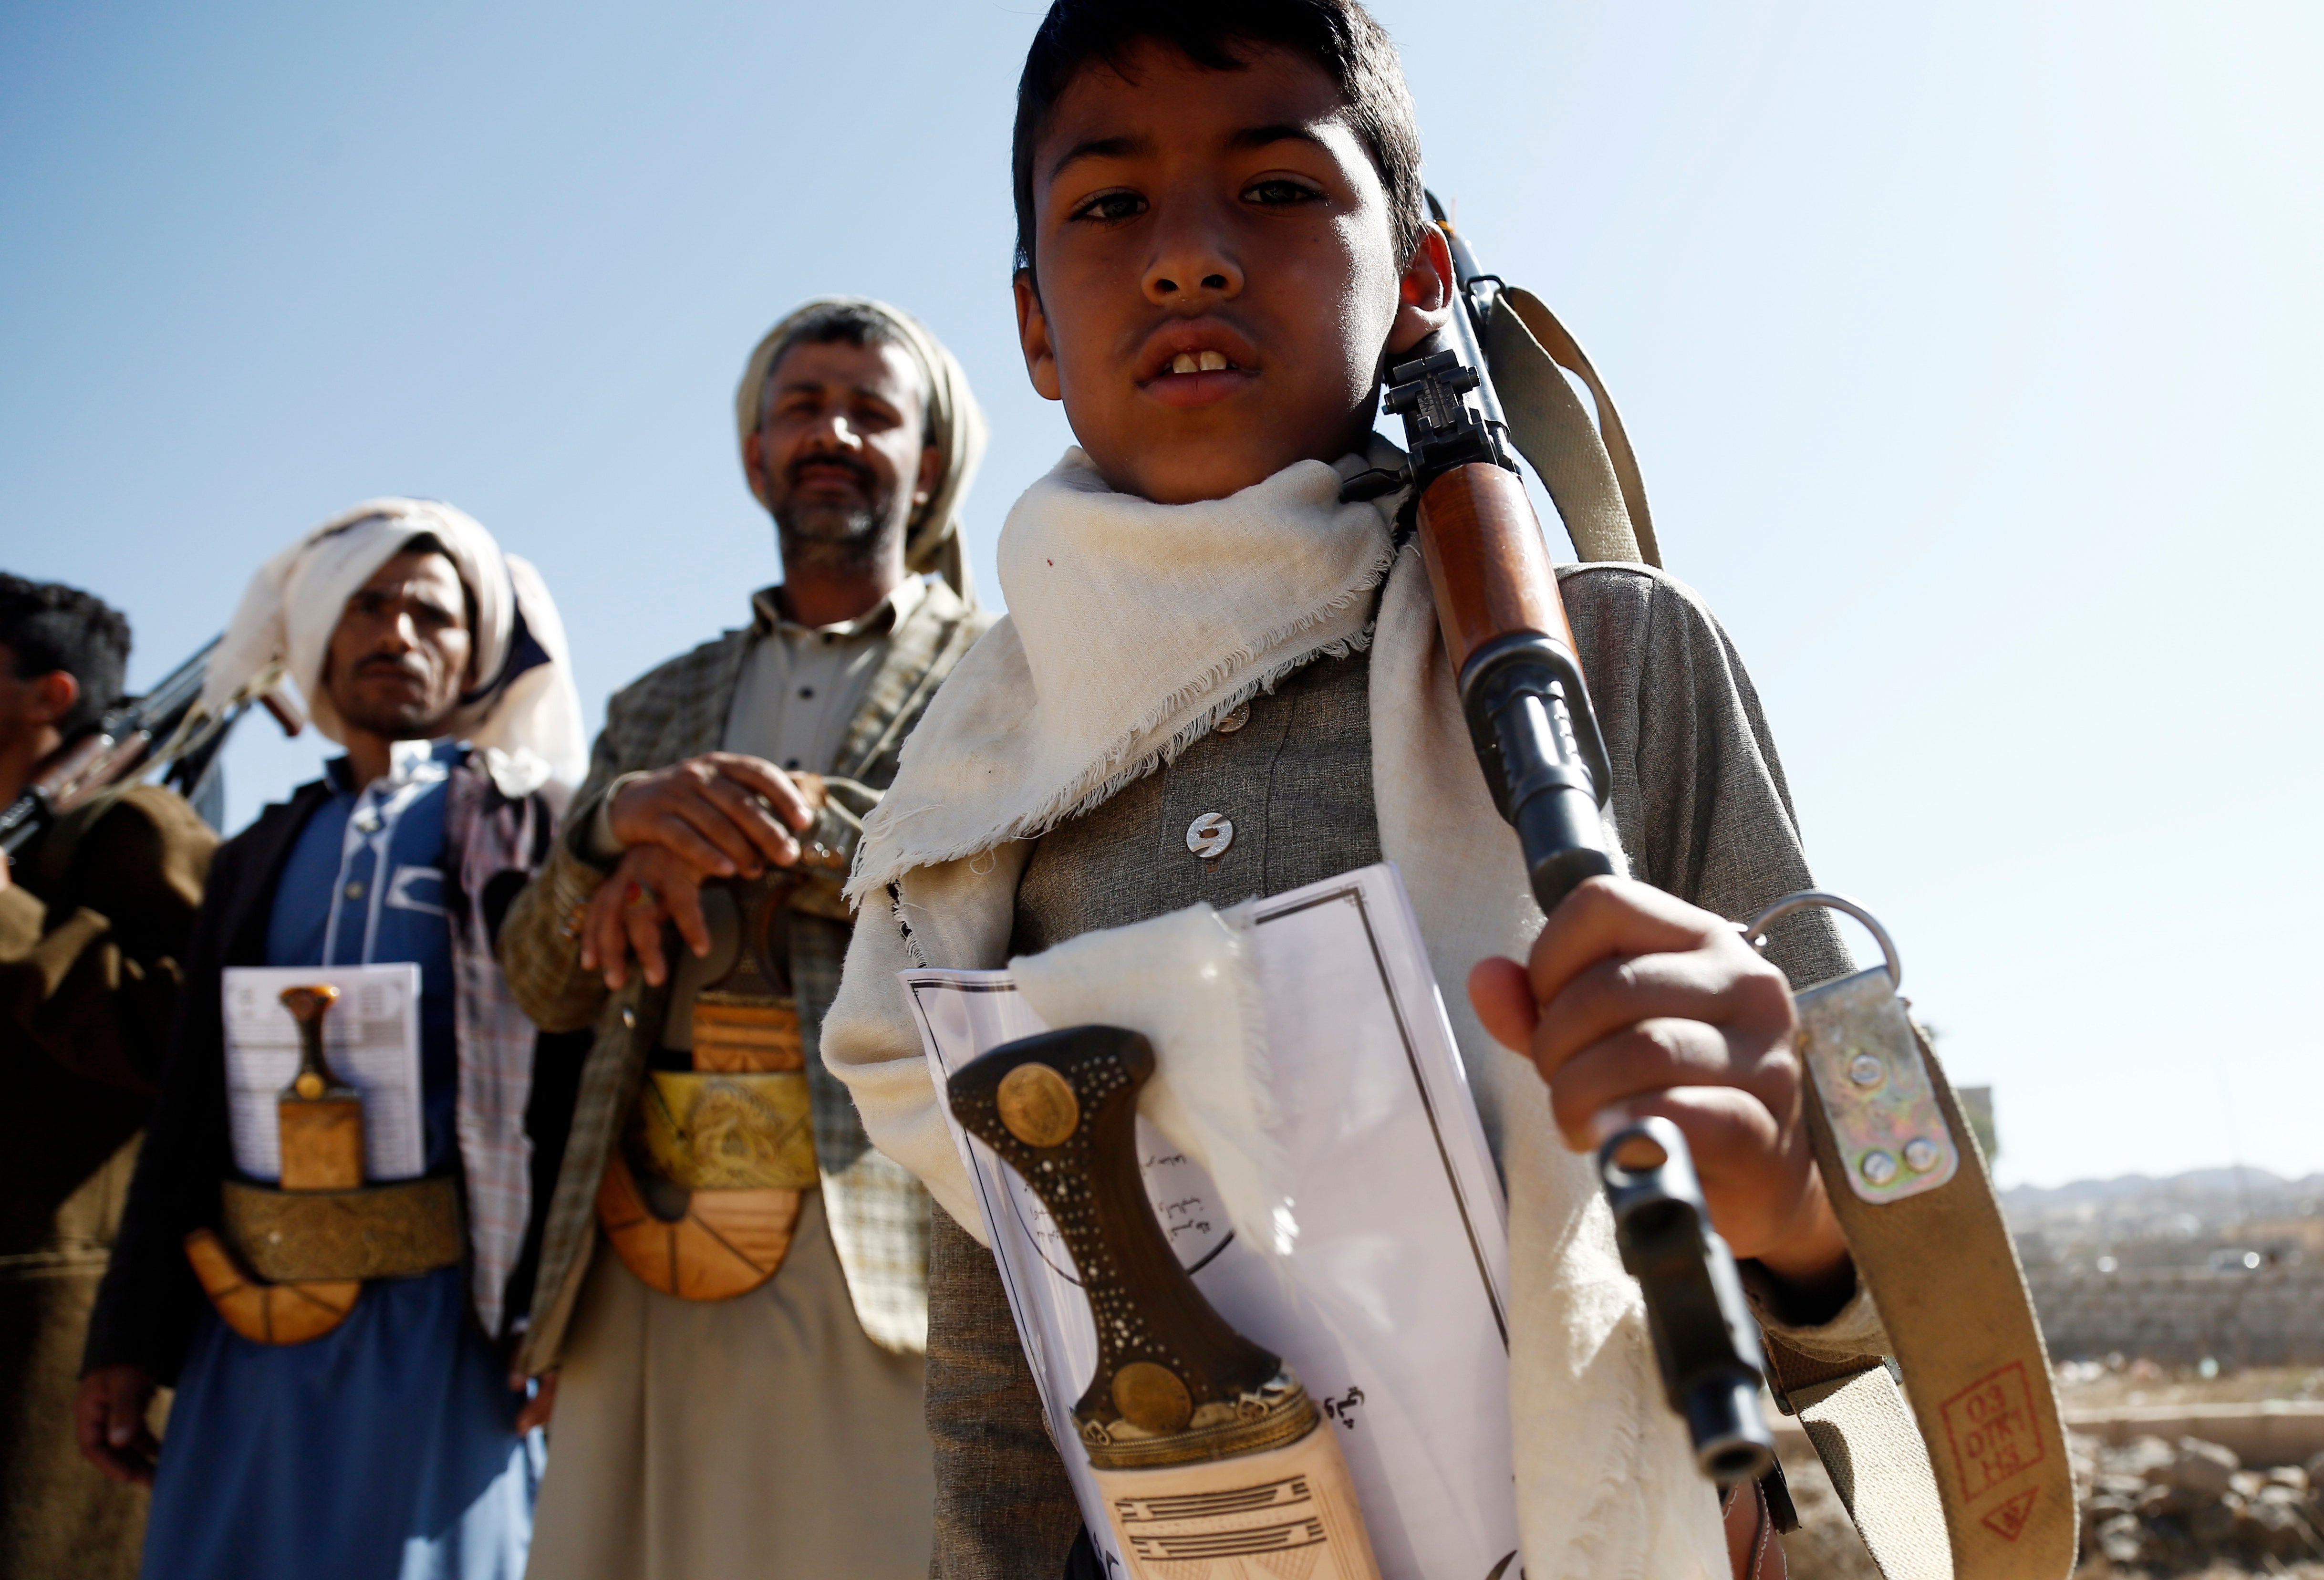 A Yemeni child carries a rifle as he participates with Houthi followers in a rally staged in solidarity with Palestinians